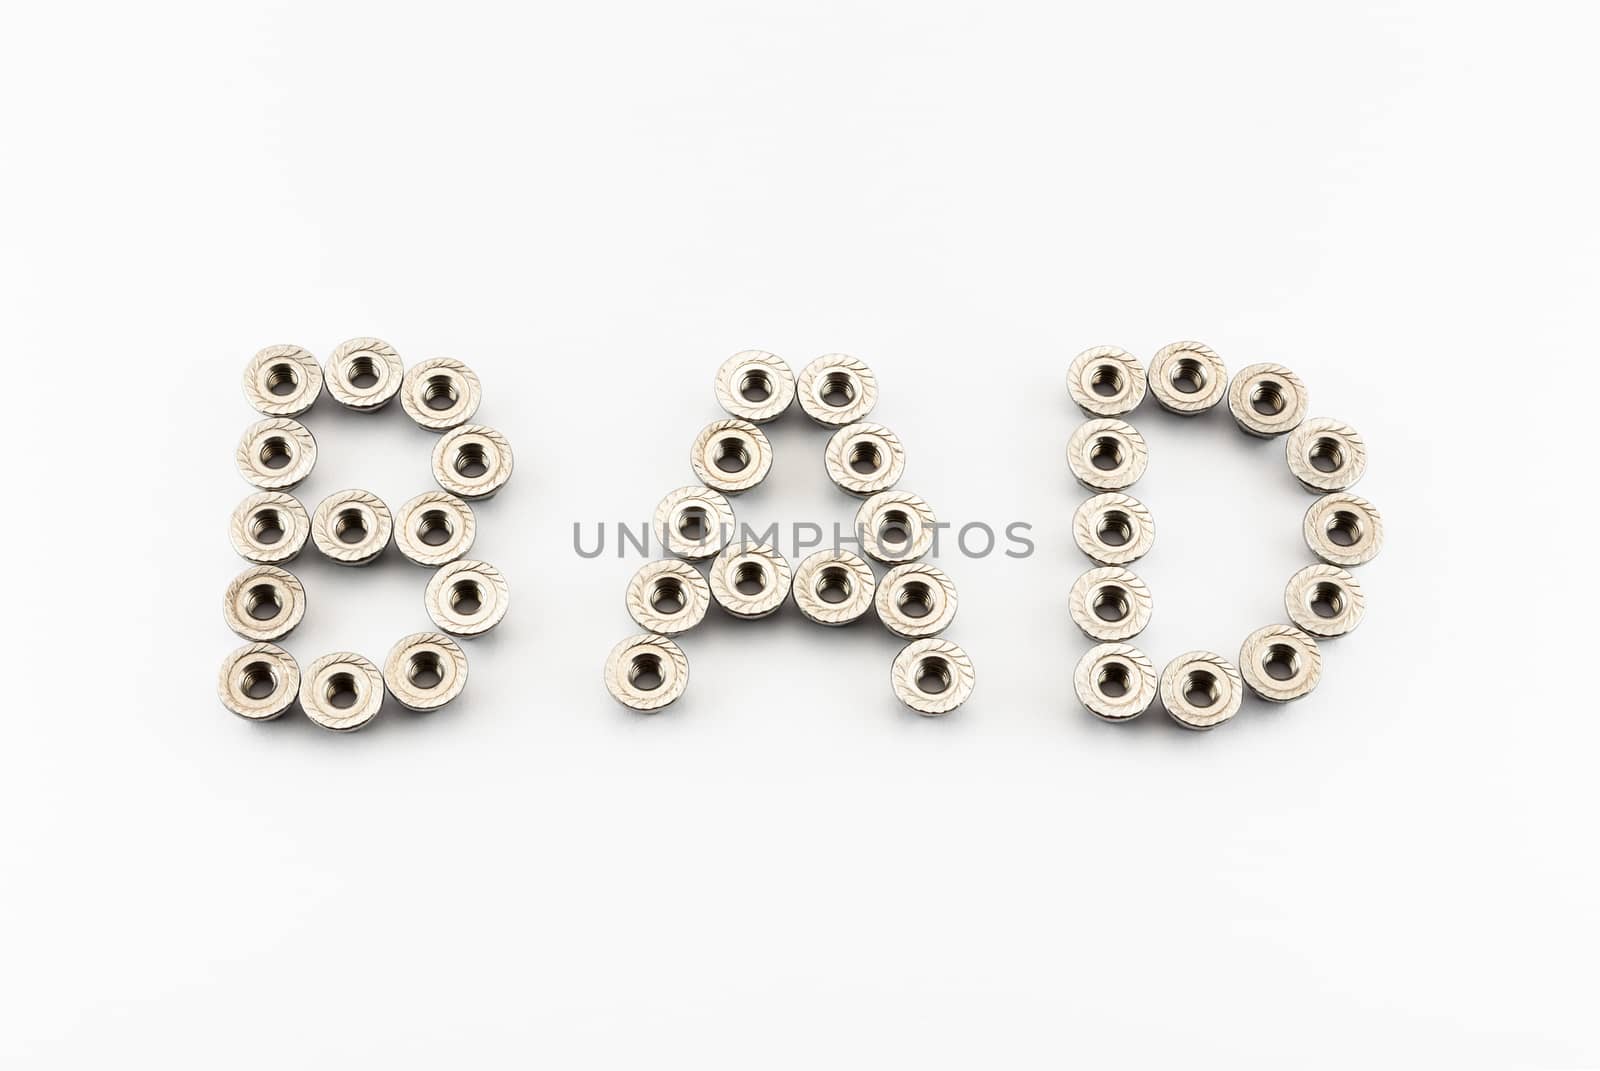 BAD Word Created by Stainless Steel Hex Flange Nuts by noneam